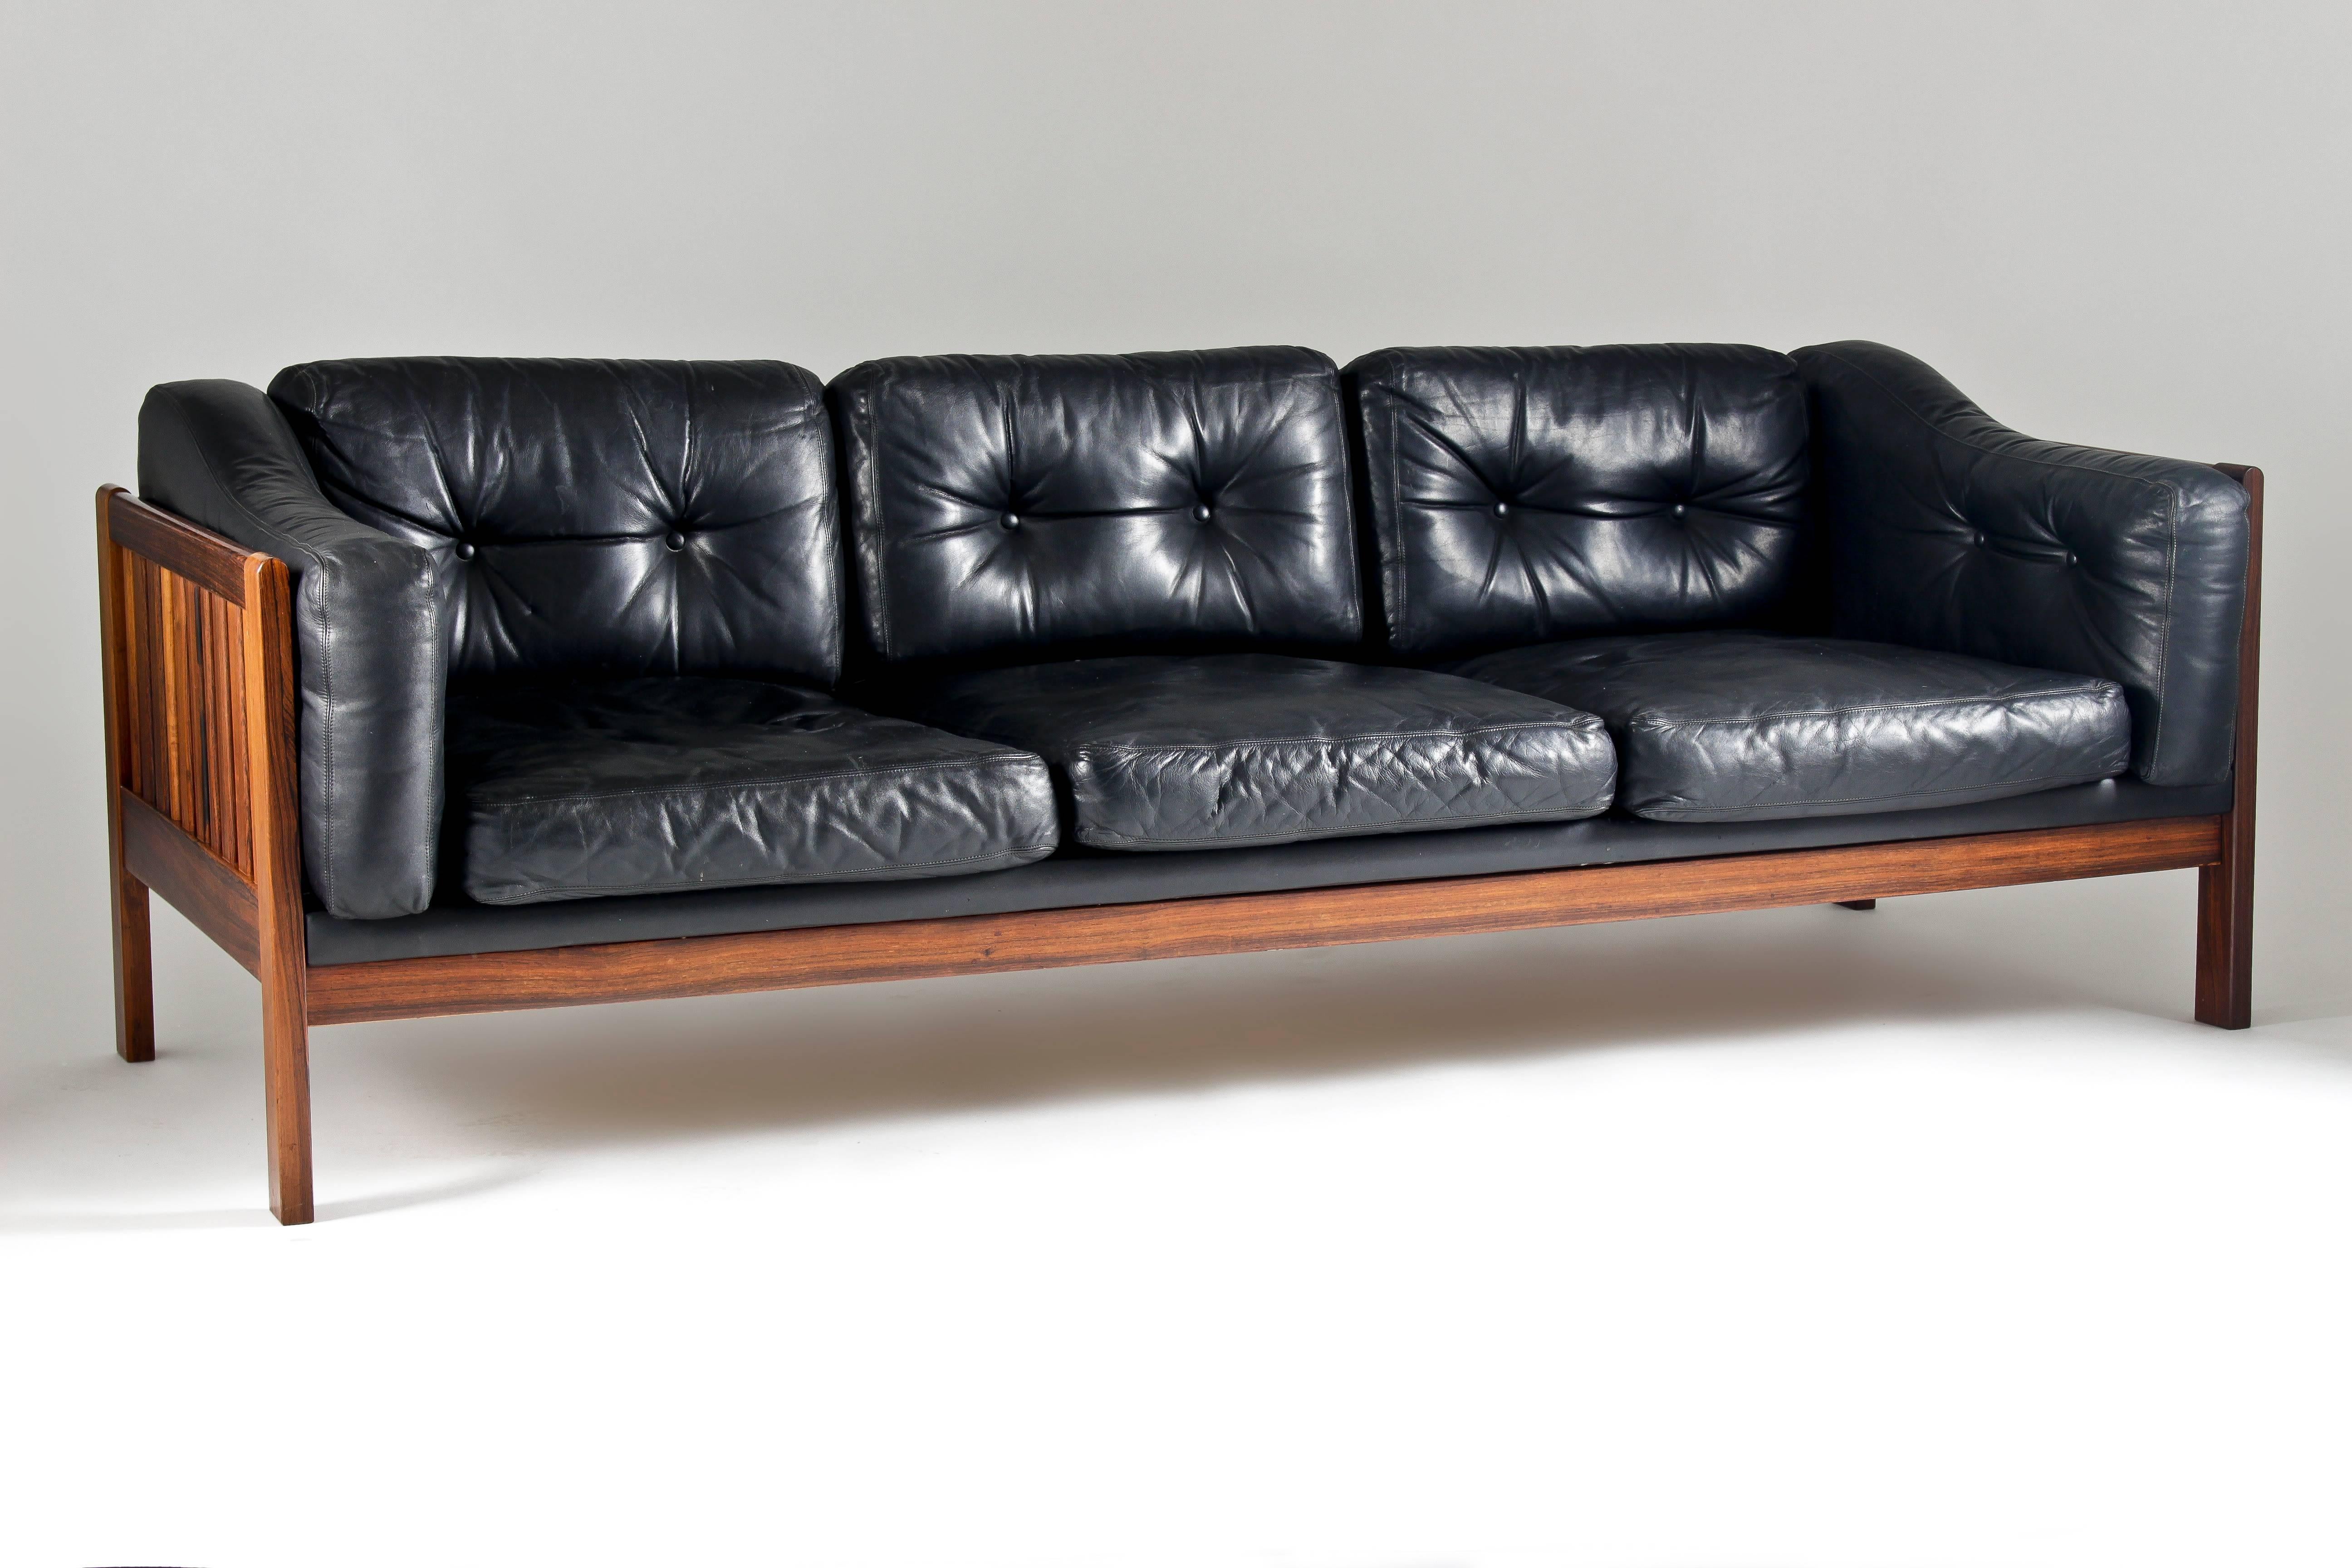 High-quality three-seater sofa designed by Ingvar Stockum for Futura Möbler in 1965. This sofa was only in production for two years because production costs were too high. This top-quality version is made of solid Brazilian rosewood and